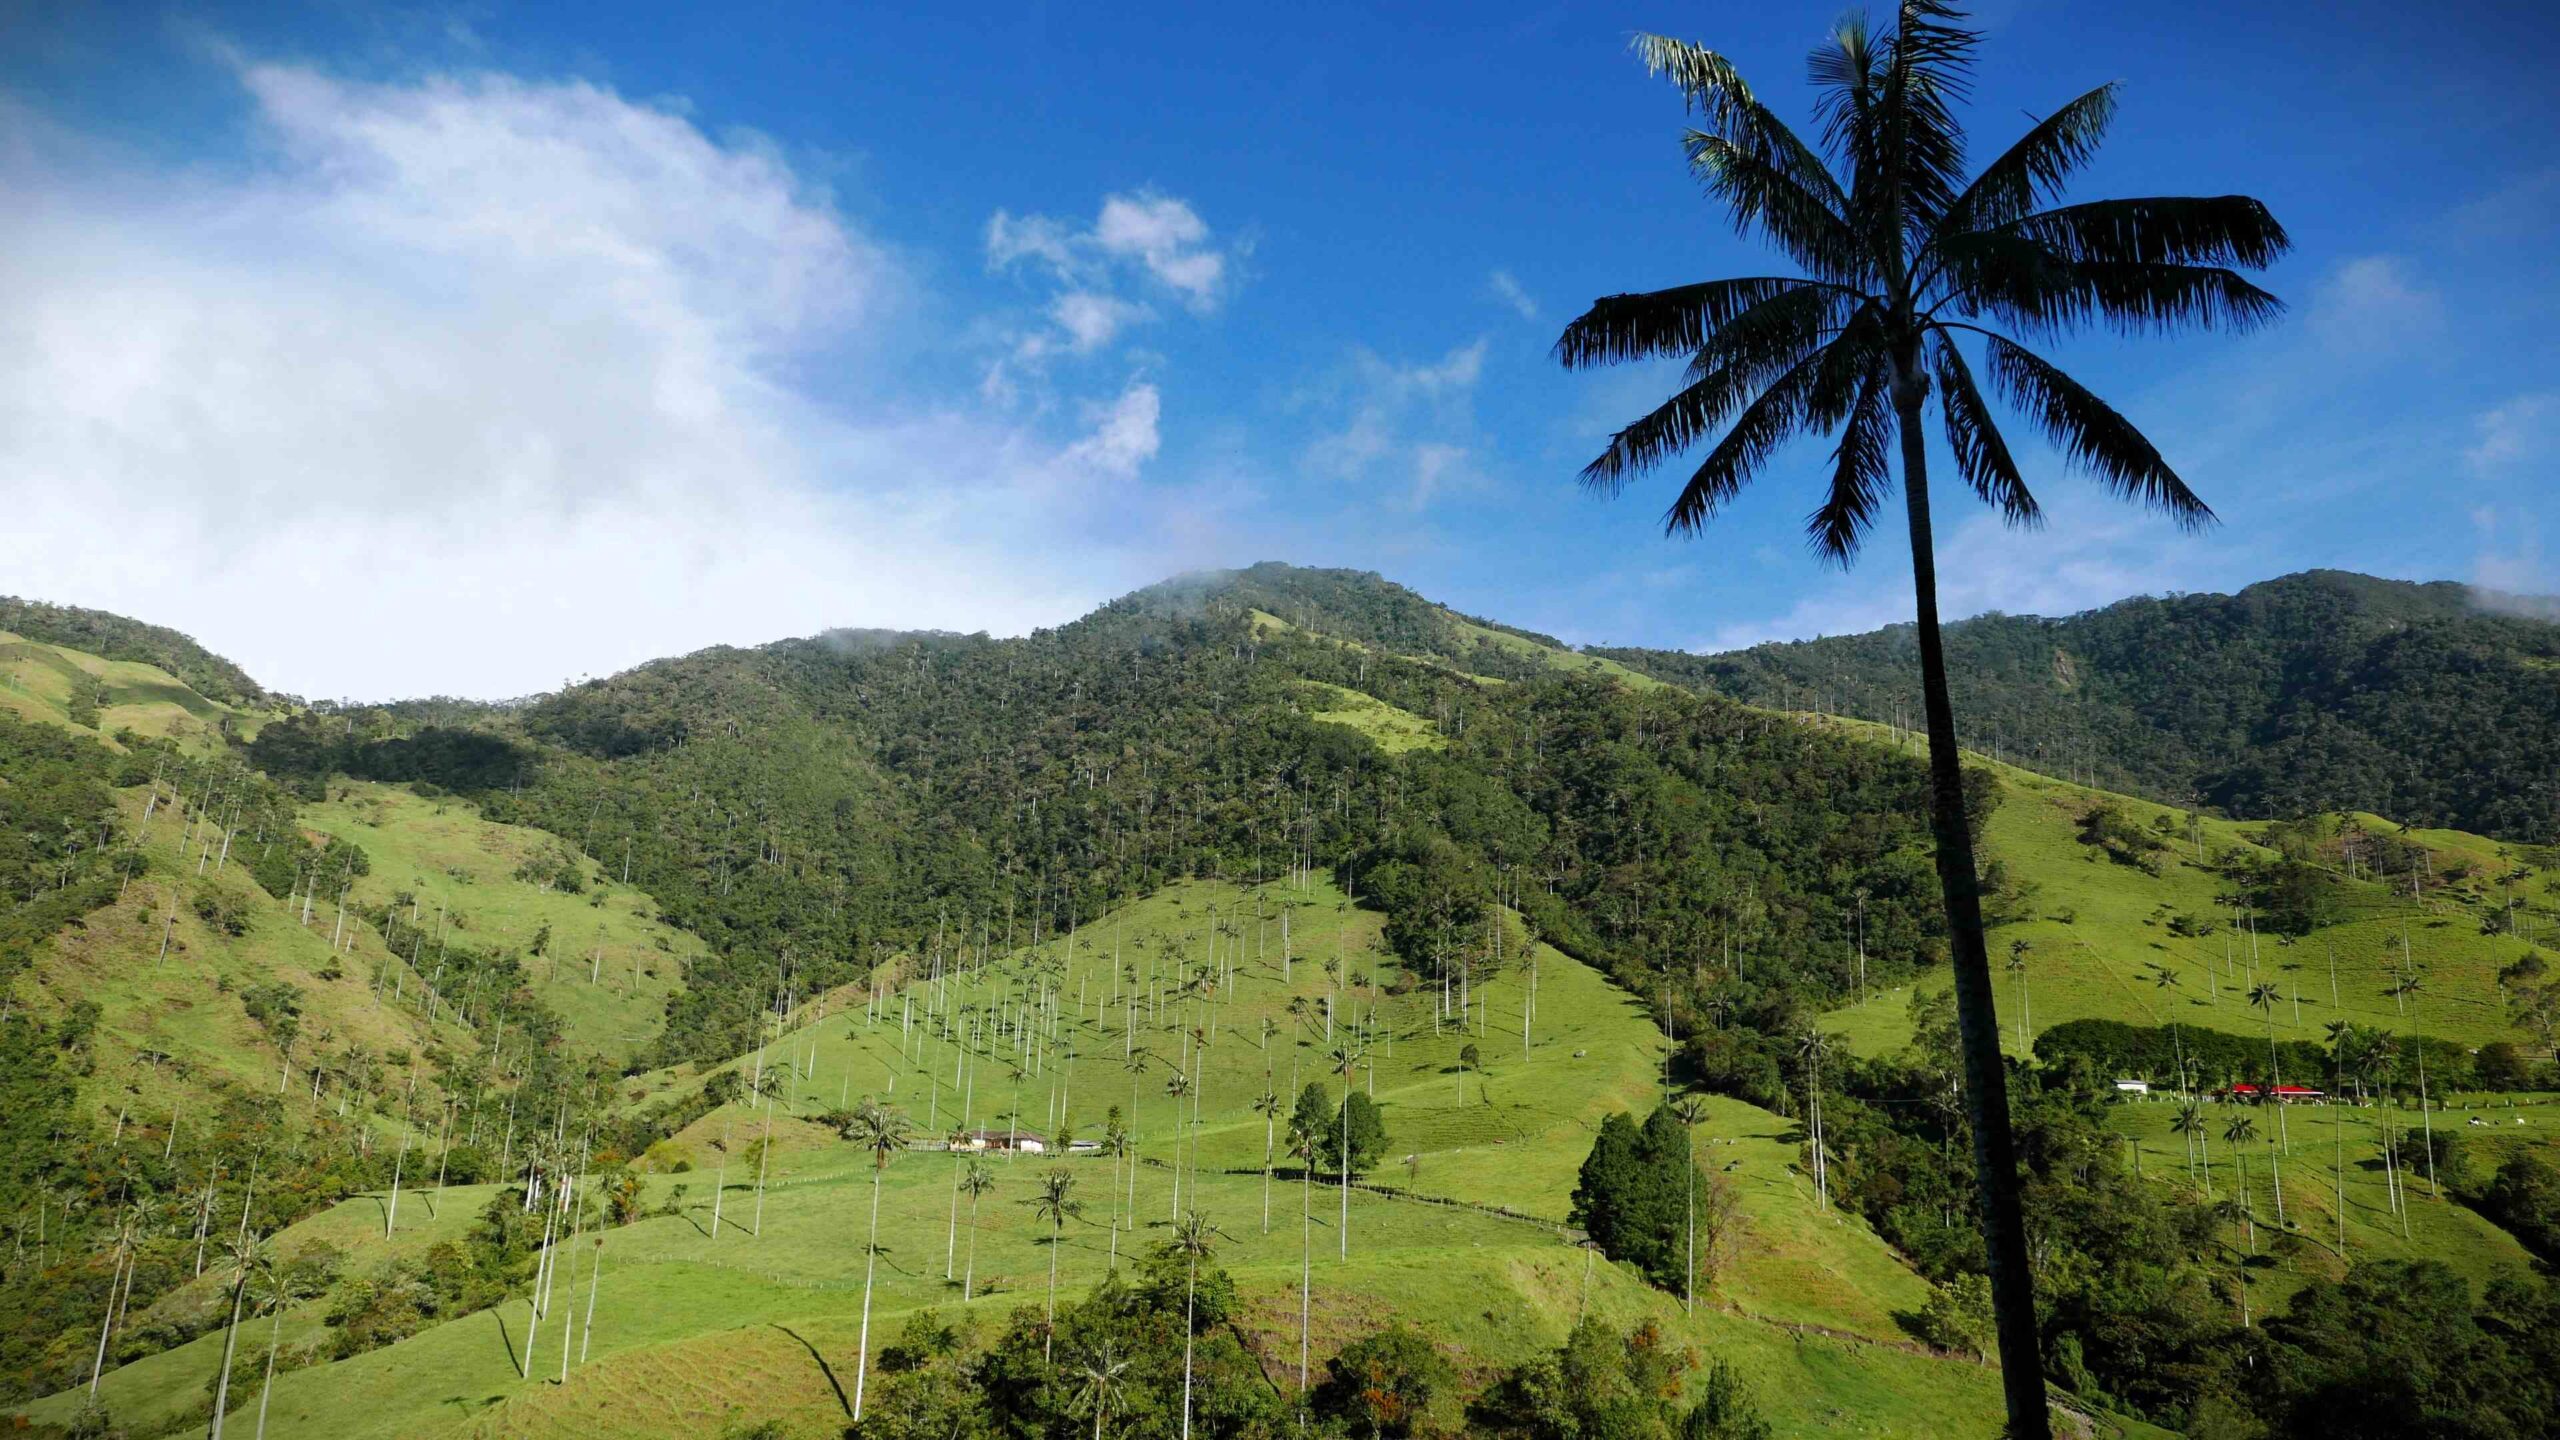 The striking wax palms ceroxylon quindiunese dominate the Cocora Valley.